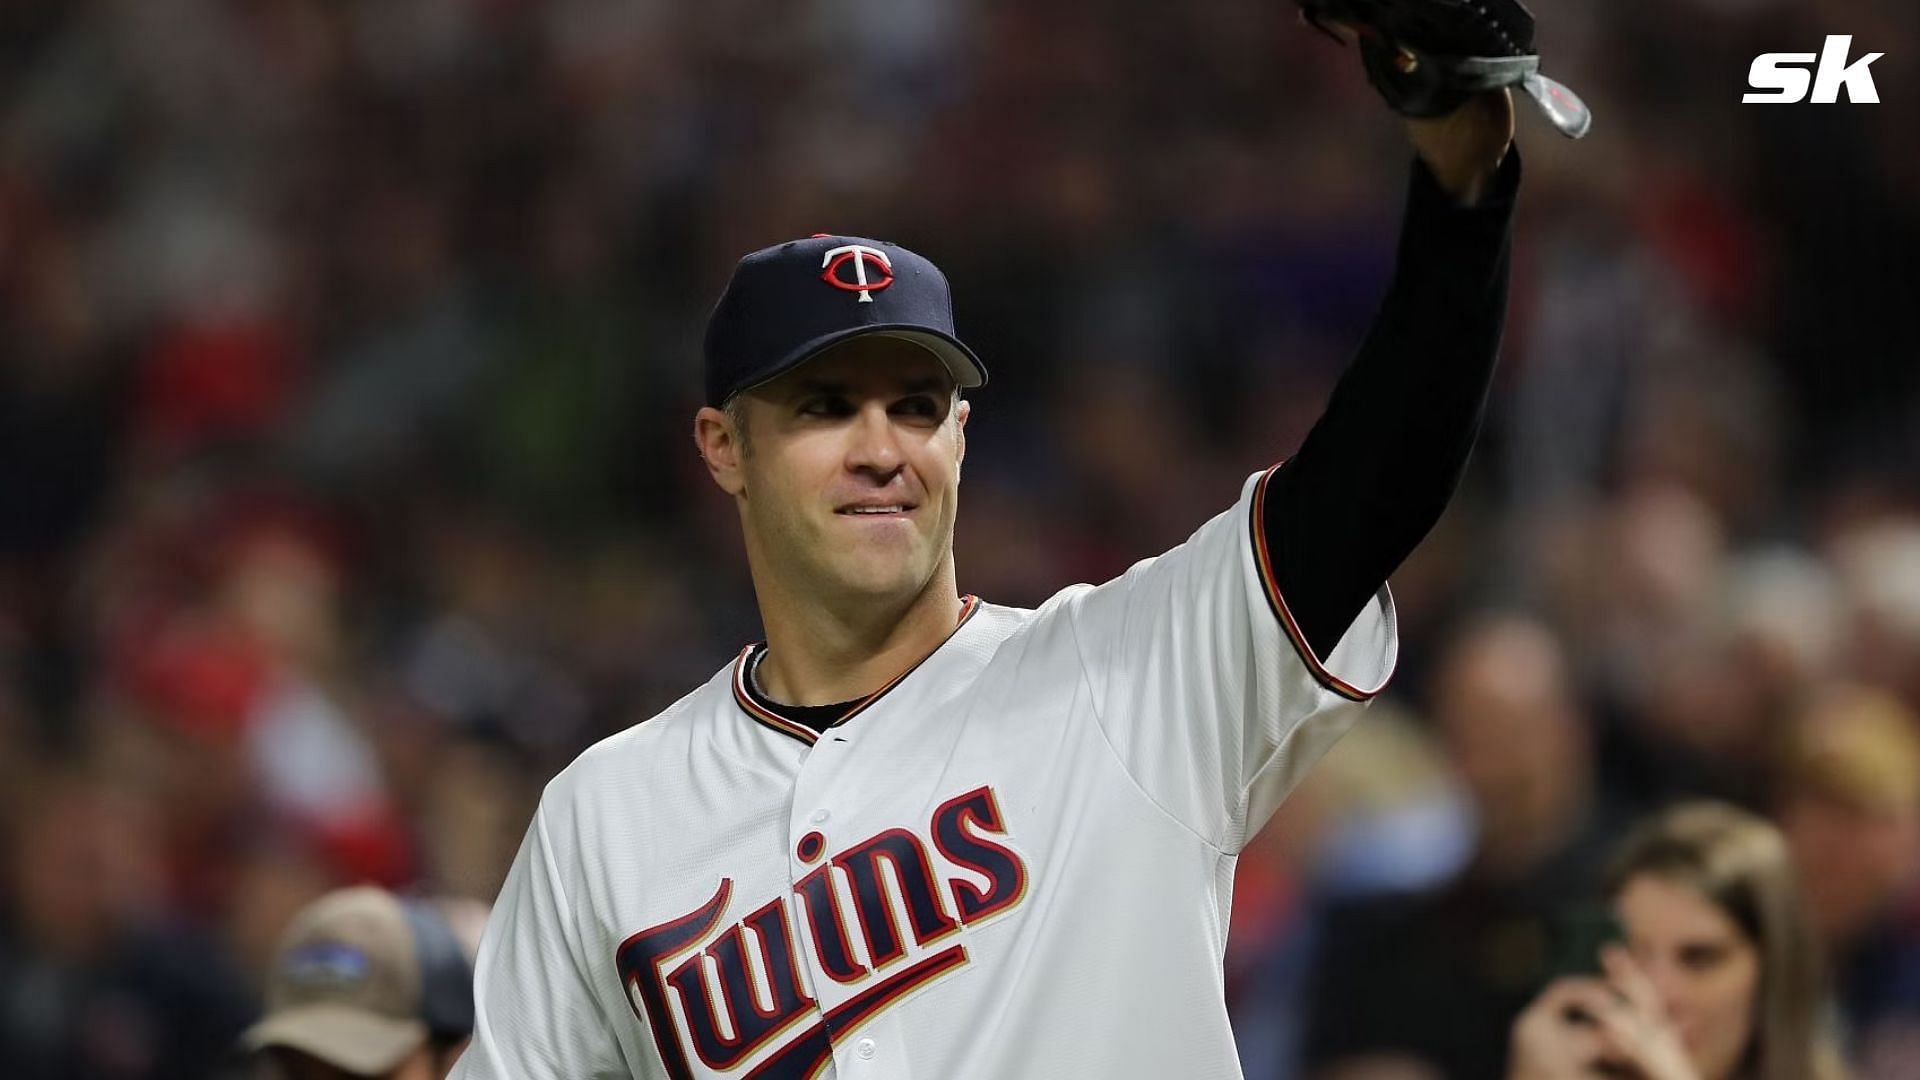 When a Twins fan mocked Joe Mauer by donning a customized t-shirt after  $184 million contract